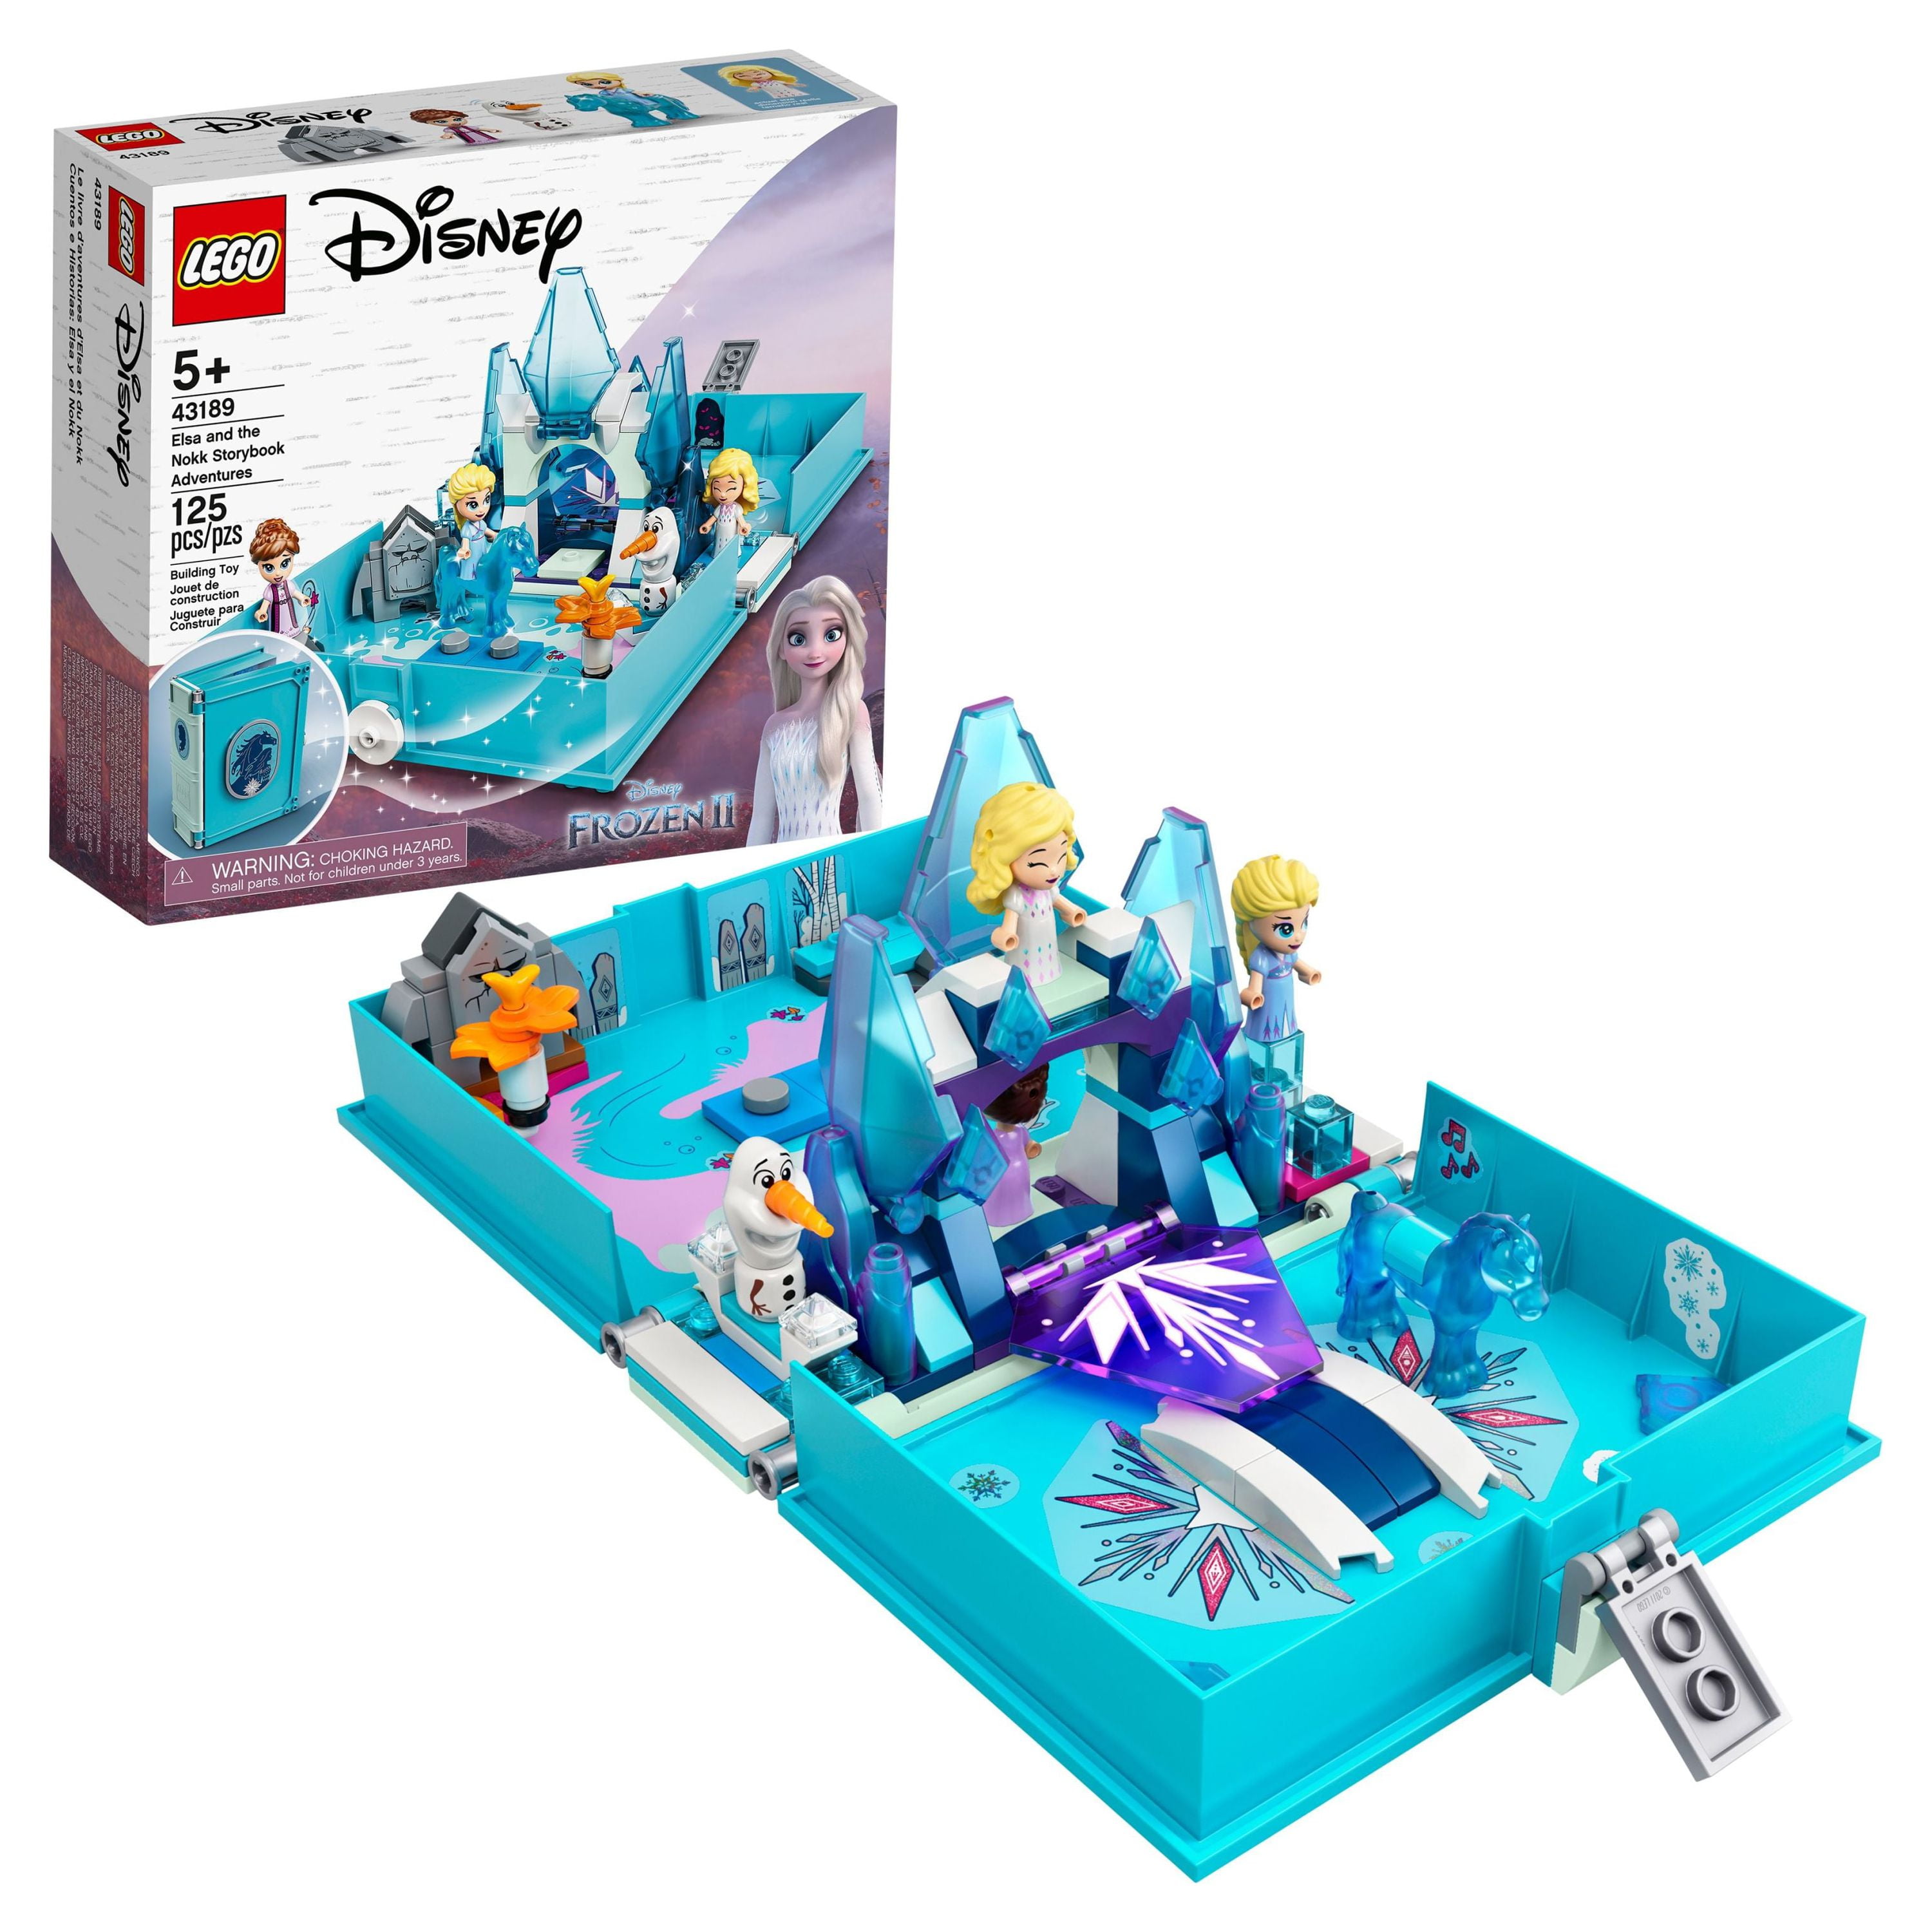 Travel, Storybook with Old Micro Boys and Playset Year Kids, Frozen 5 2 Disney LEGO Adventures Perfect Toy Gifts Princess for Plus Doll 43189, & Girls the for Disney Elsa Nokk